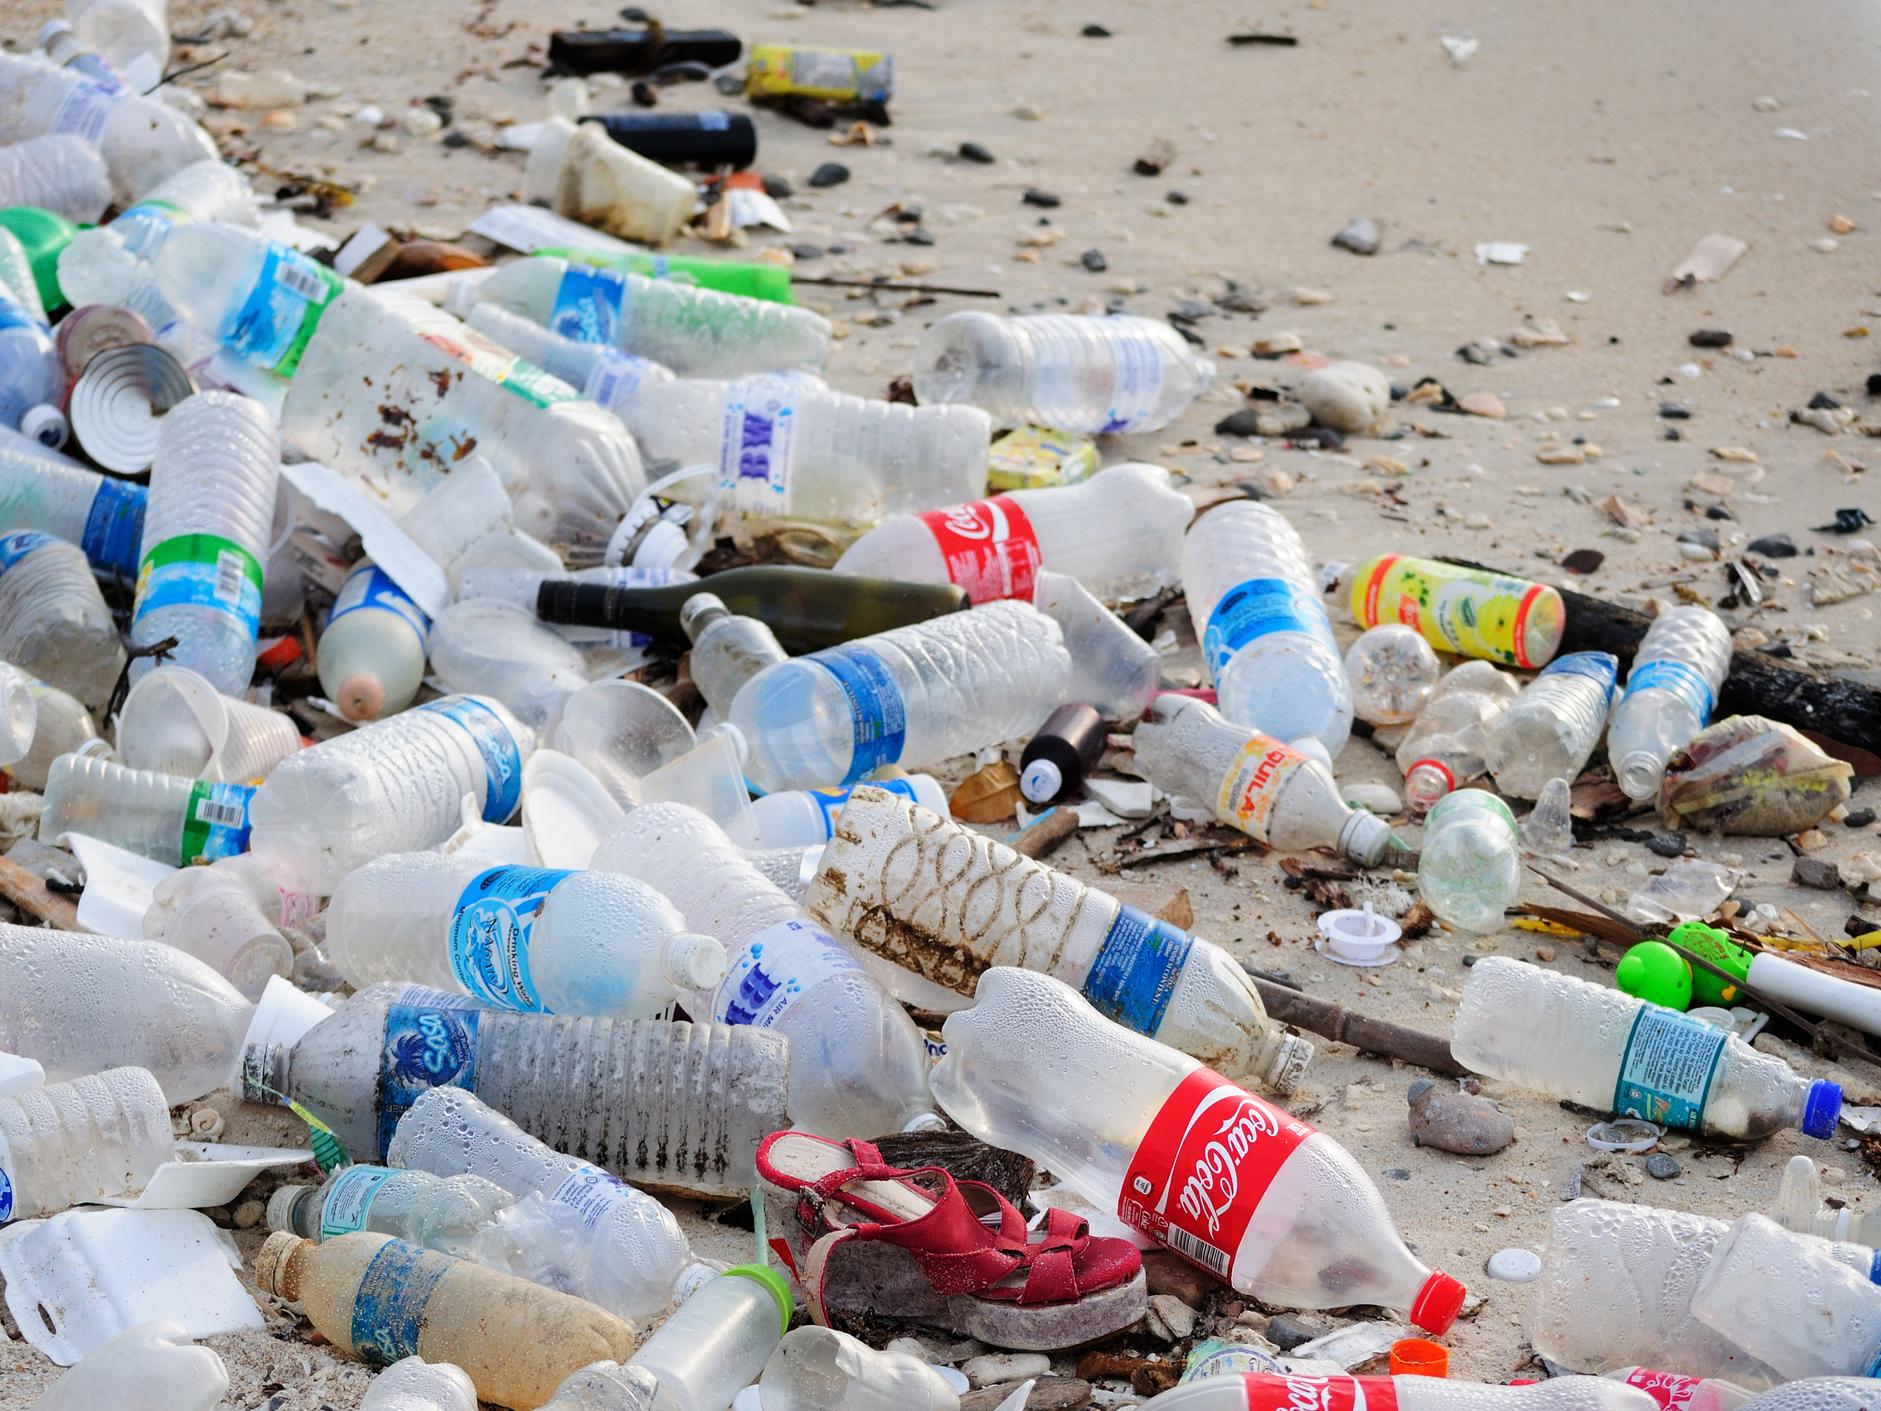 New European strategy also includes plans for a reduction in consumption of single-use plastics